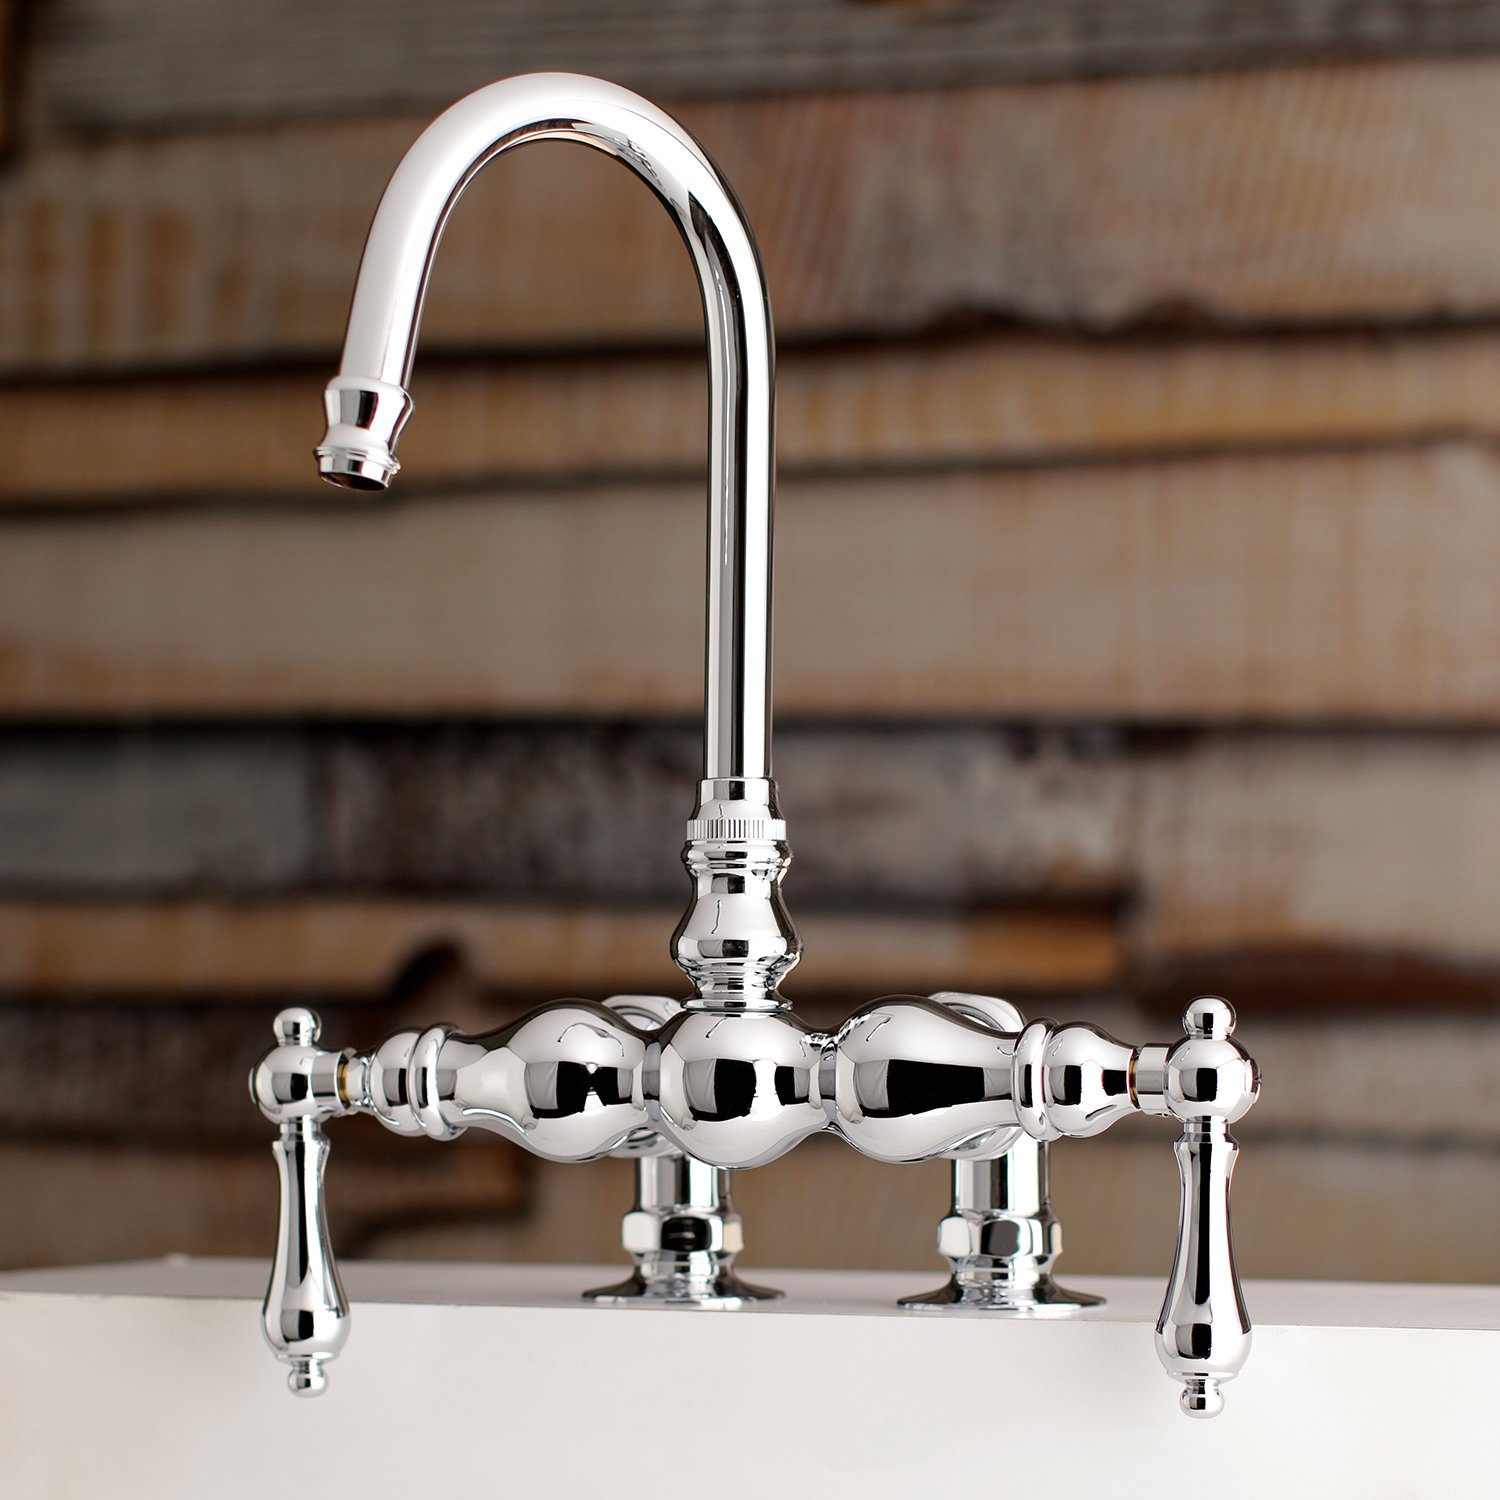 KINGSTON BRASS AE92T1 VINTAGE DECK MOUNT CLAWFOOT TUB FAUCET IN POLISHED CHROME